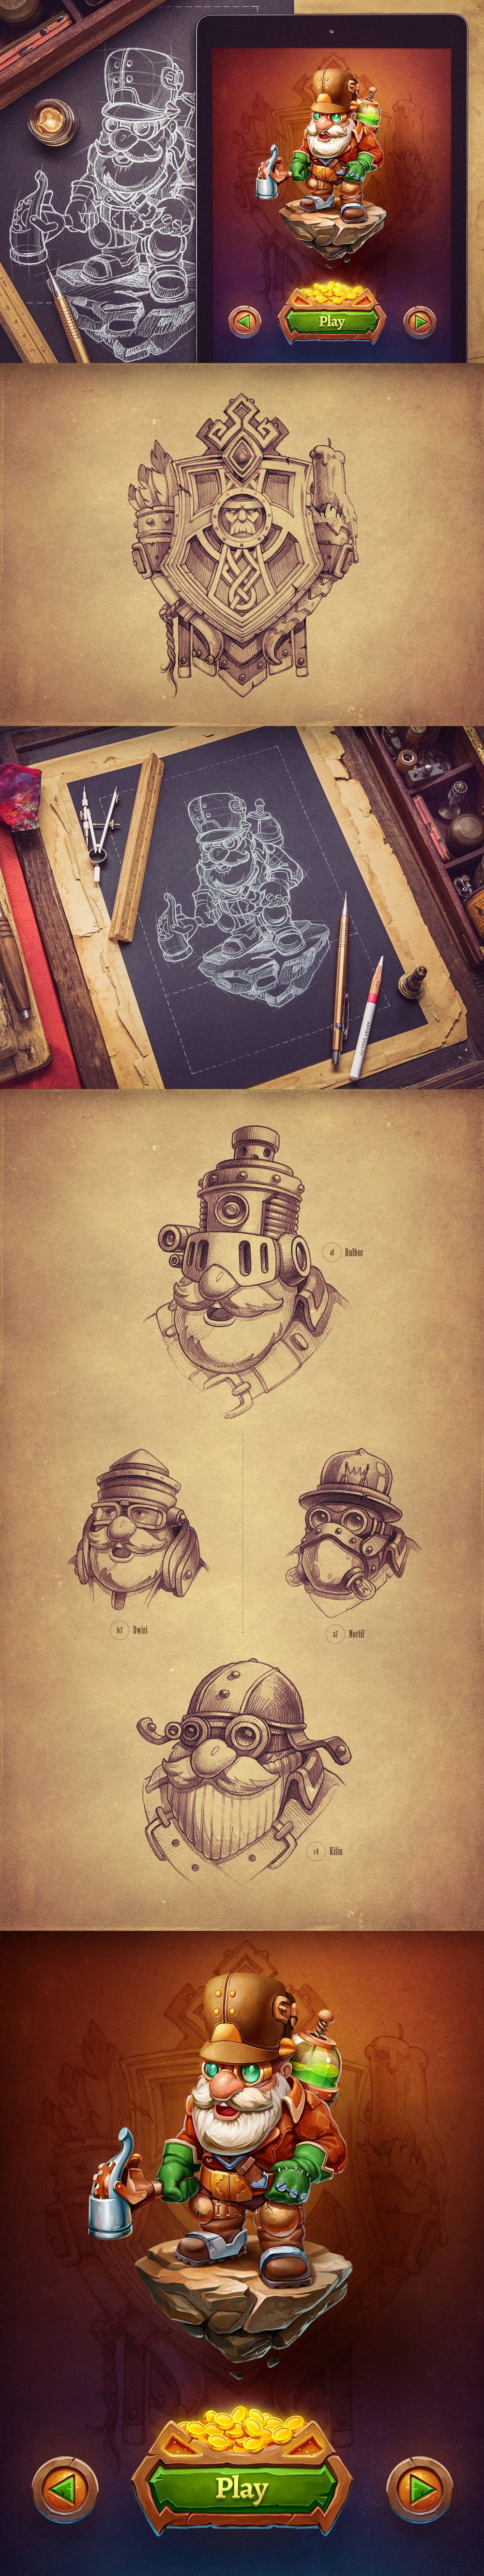 ios game iphone sketch Character design UI Interface STEAMPUNK arcade plane stone